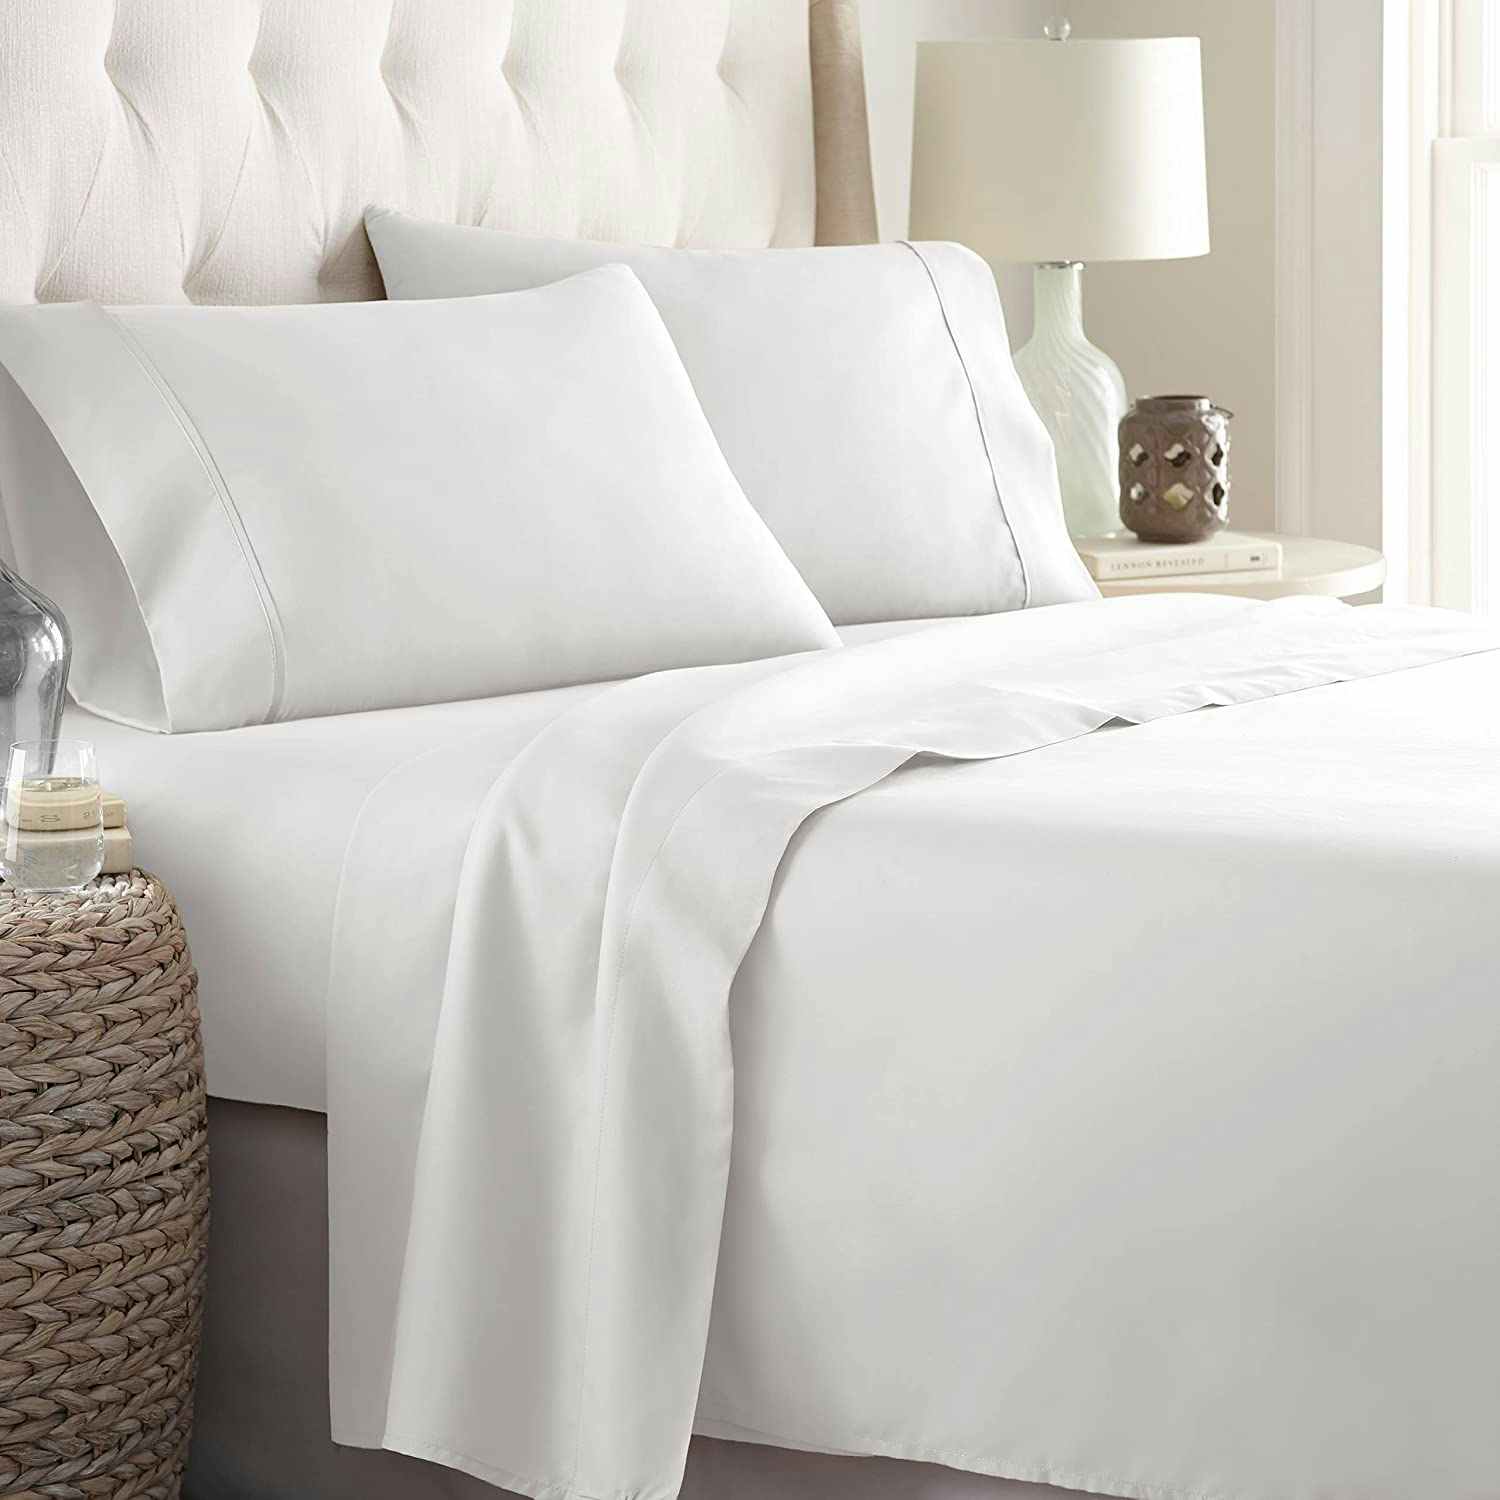 A white bed sheet set on a bed.